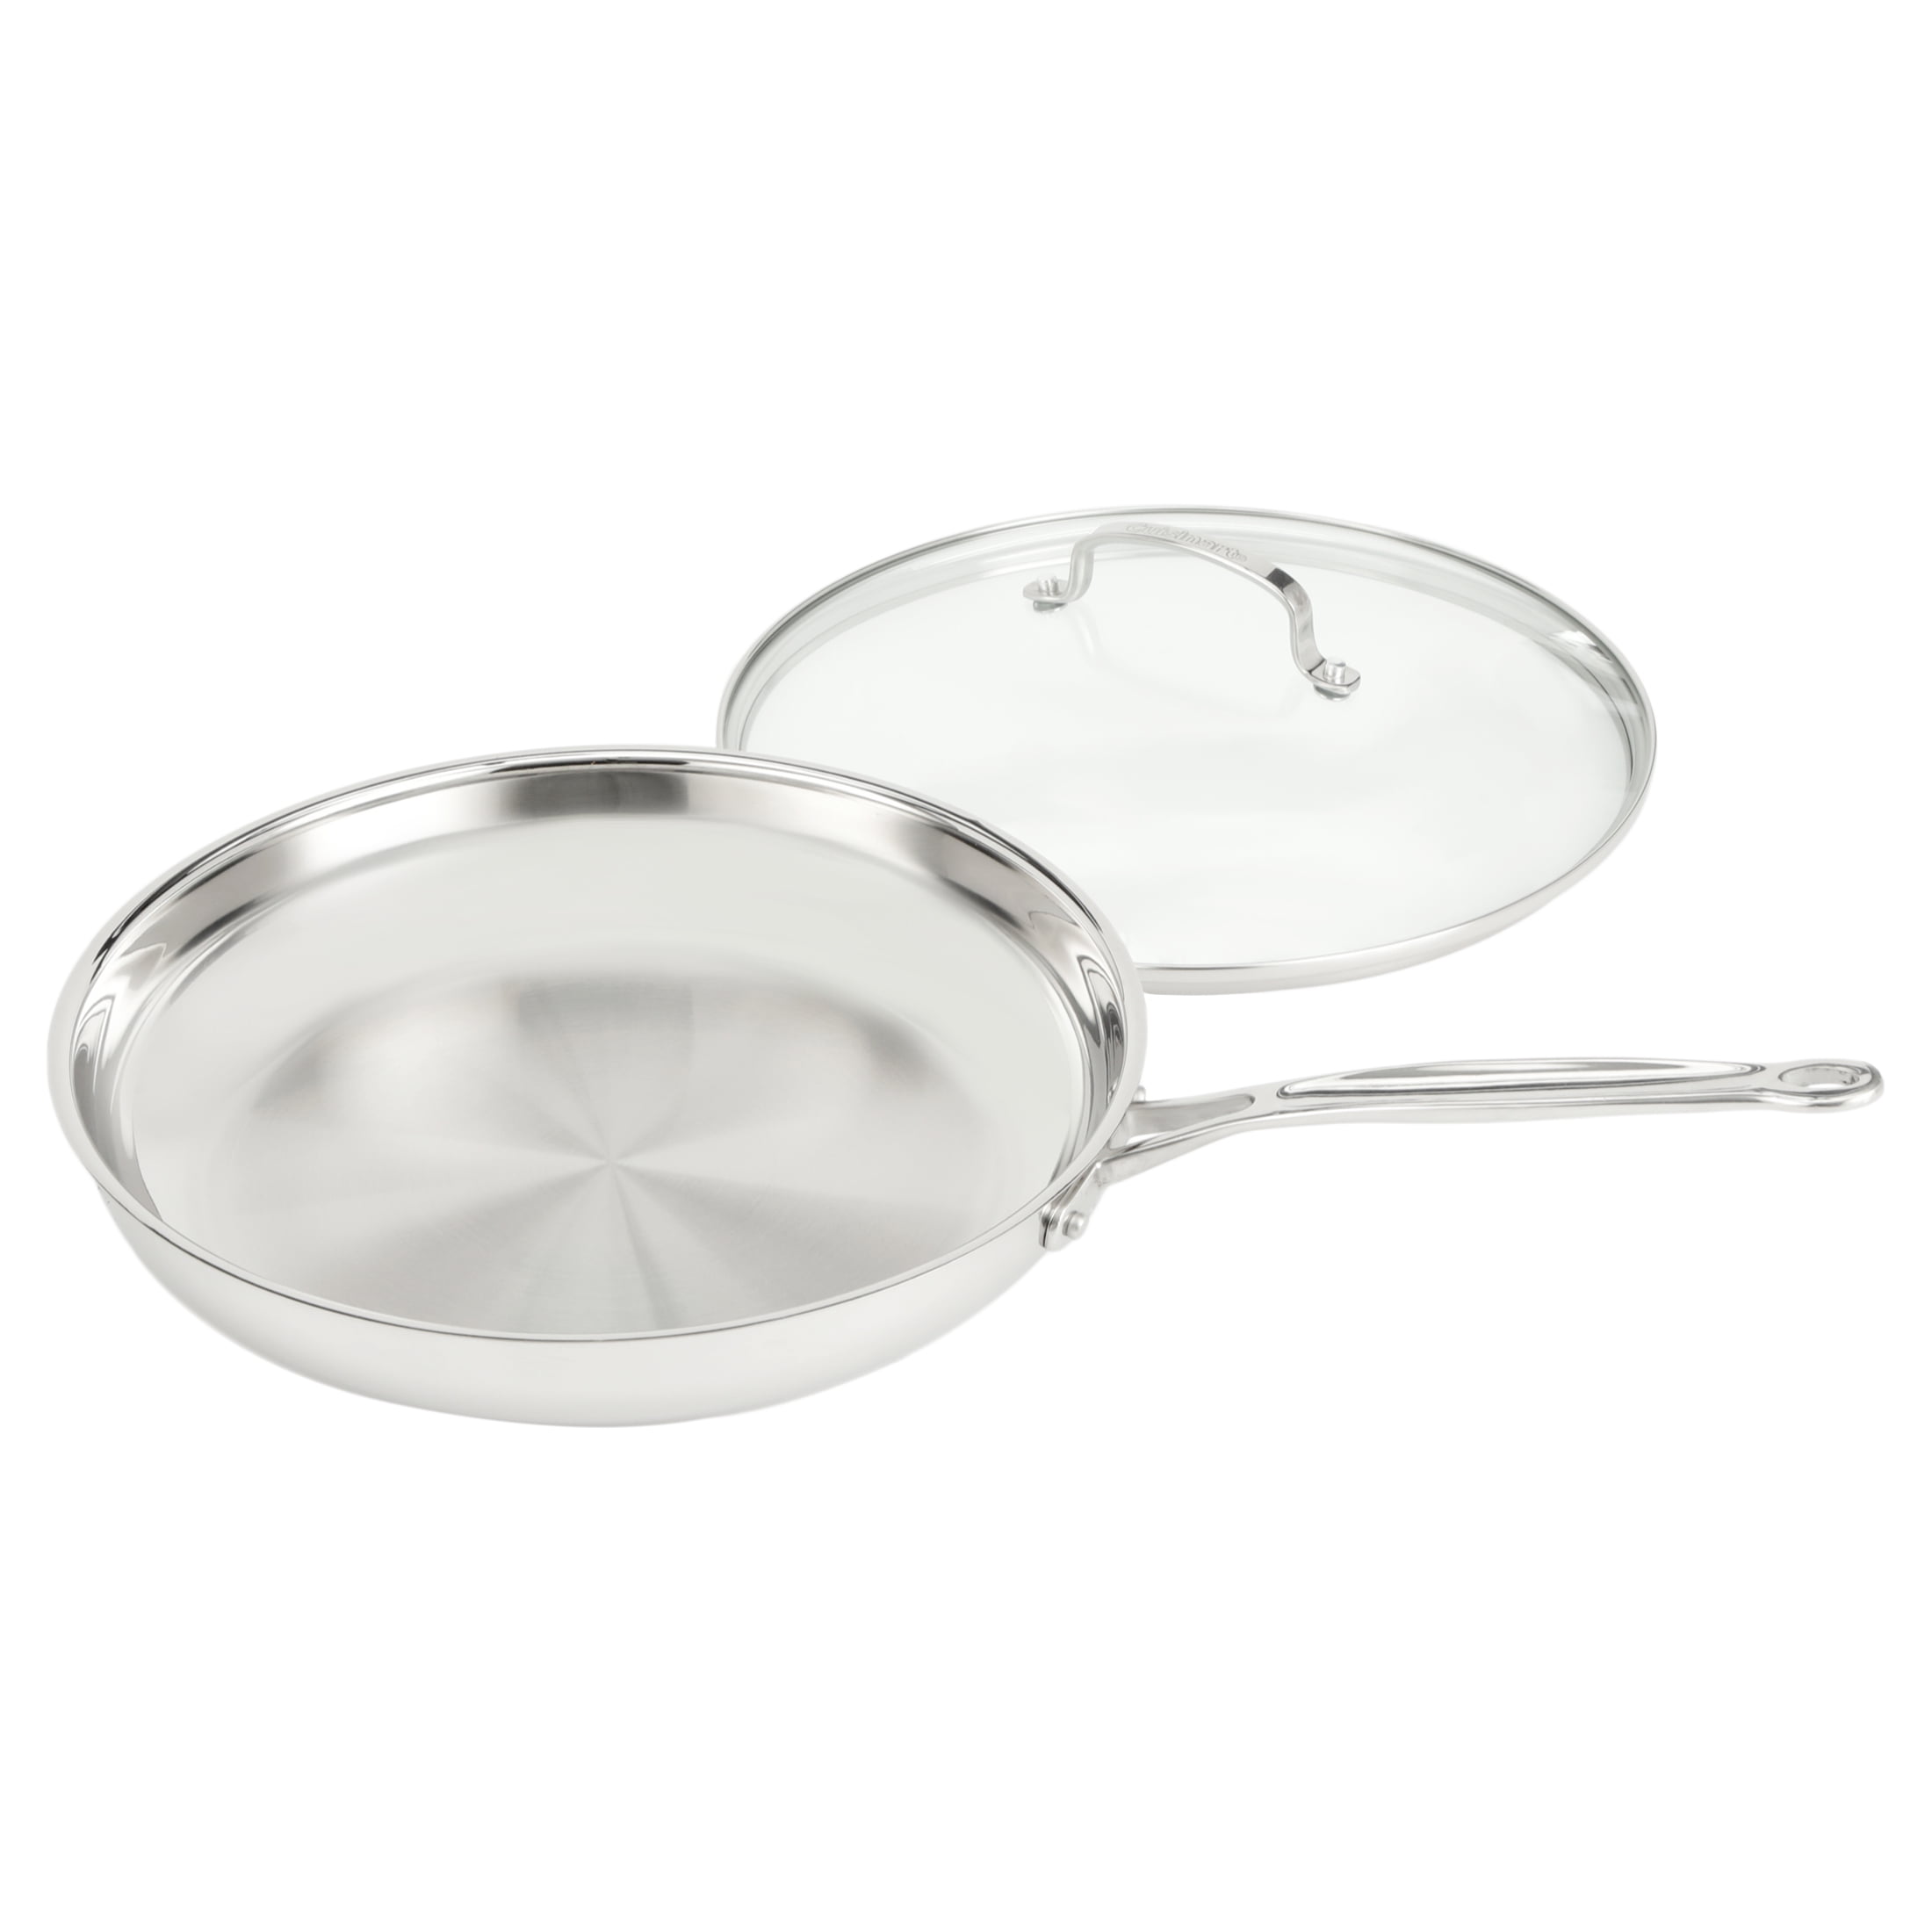 Cuisinart 12 Inch Skillet with Glass Cover, Chef's Classic Collection,  722-30G